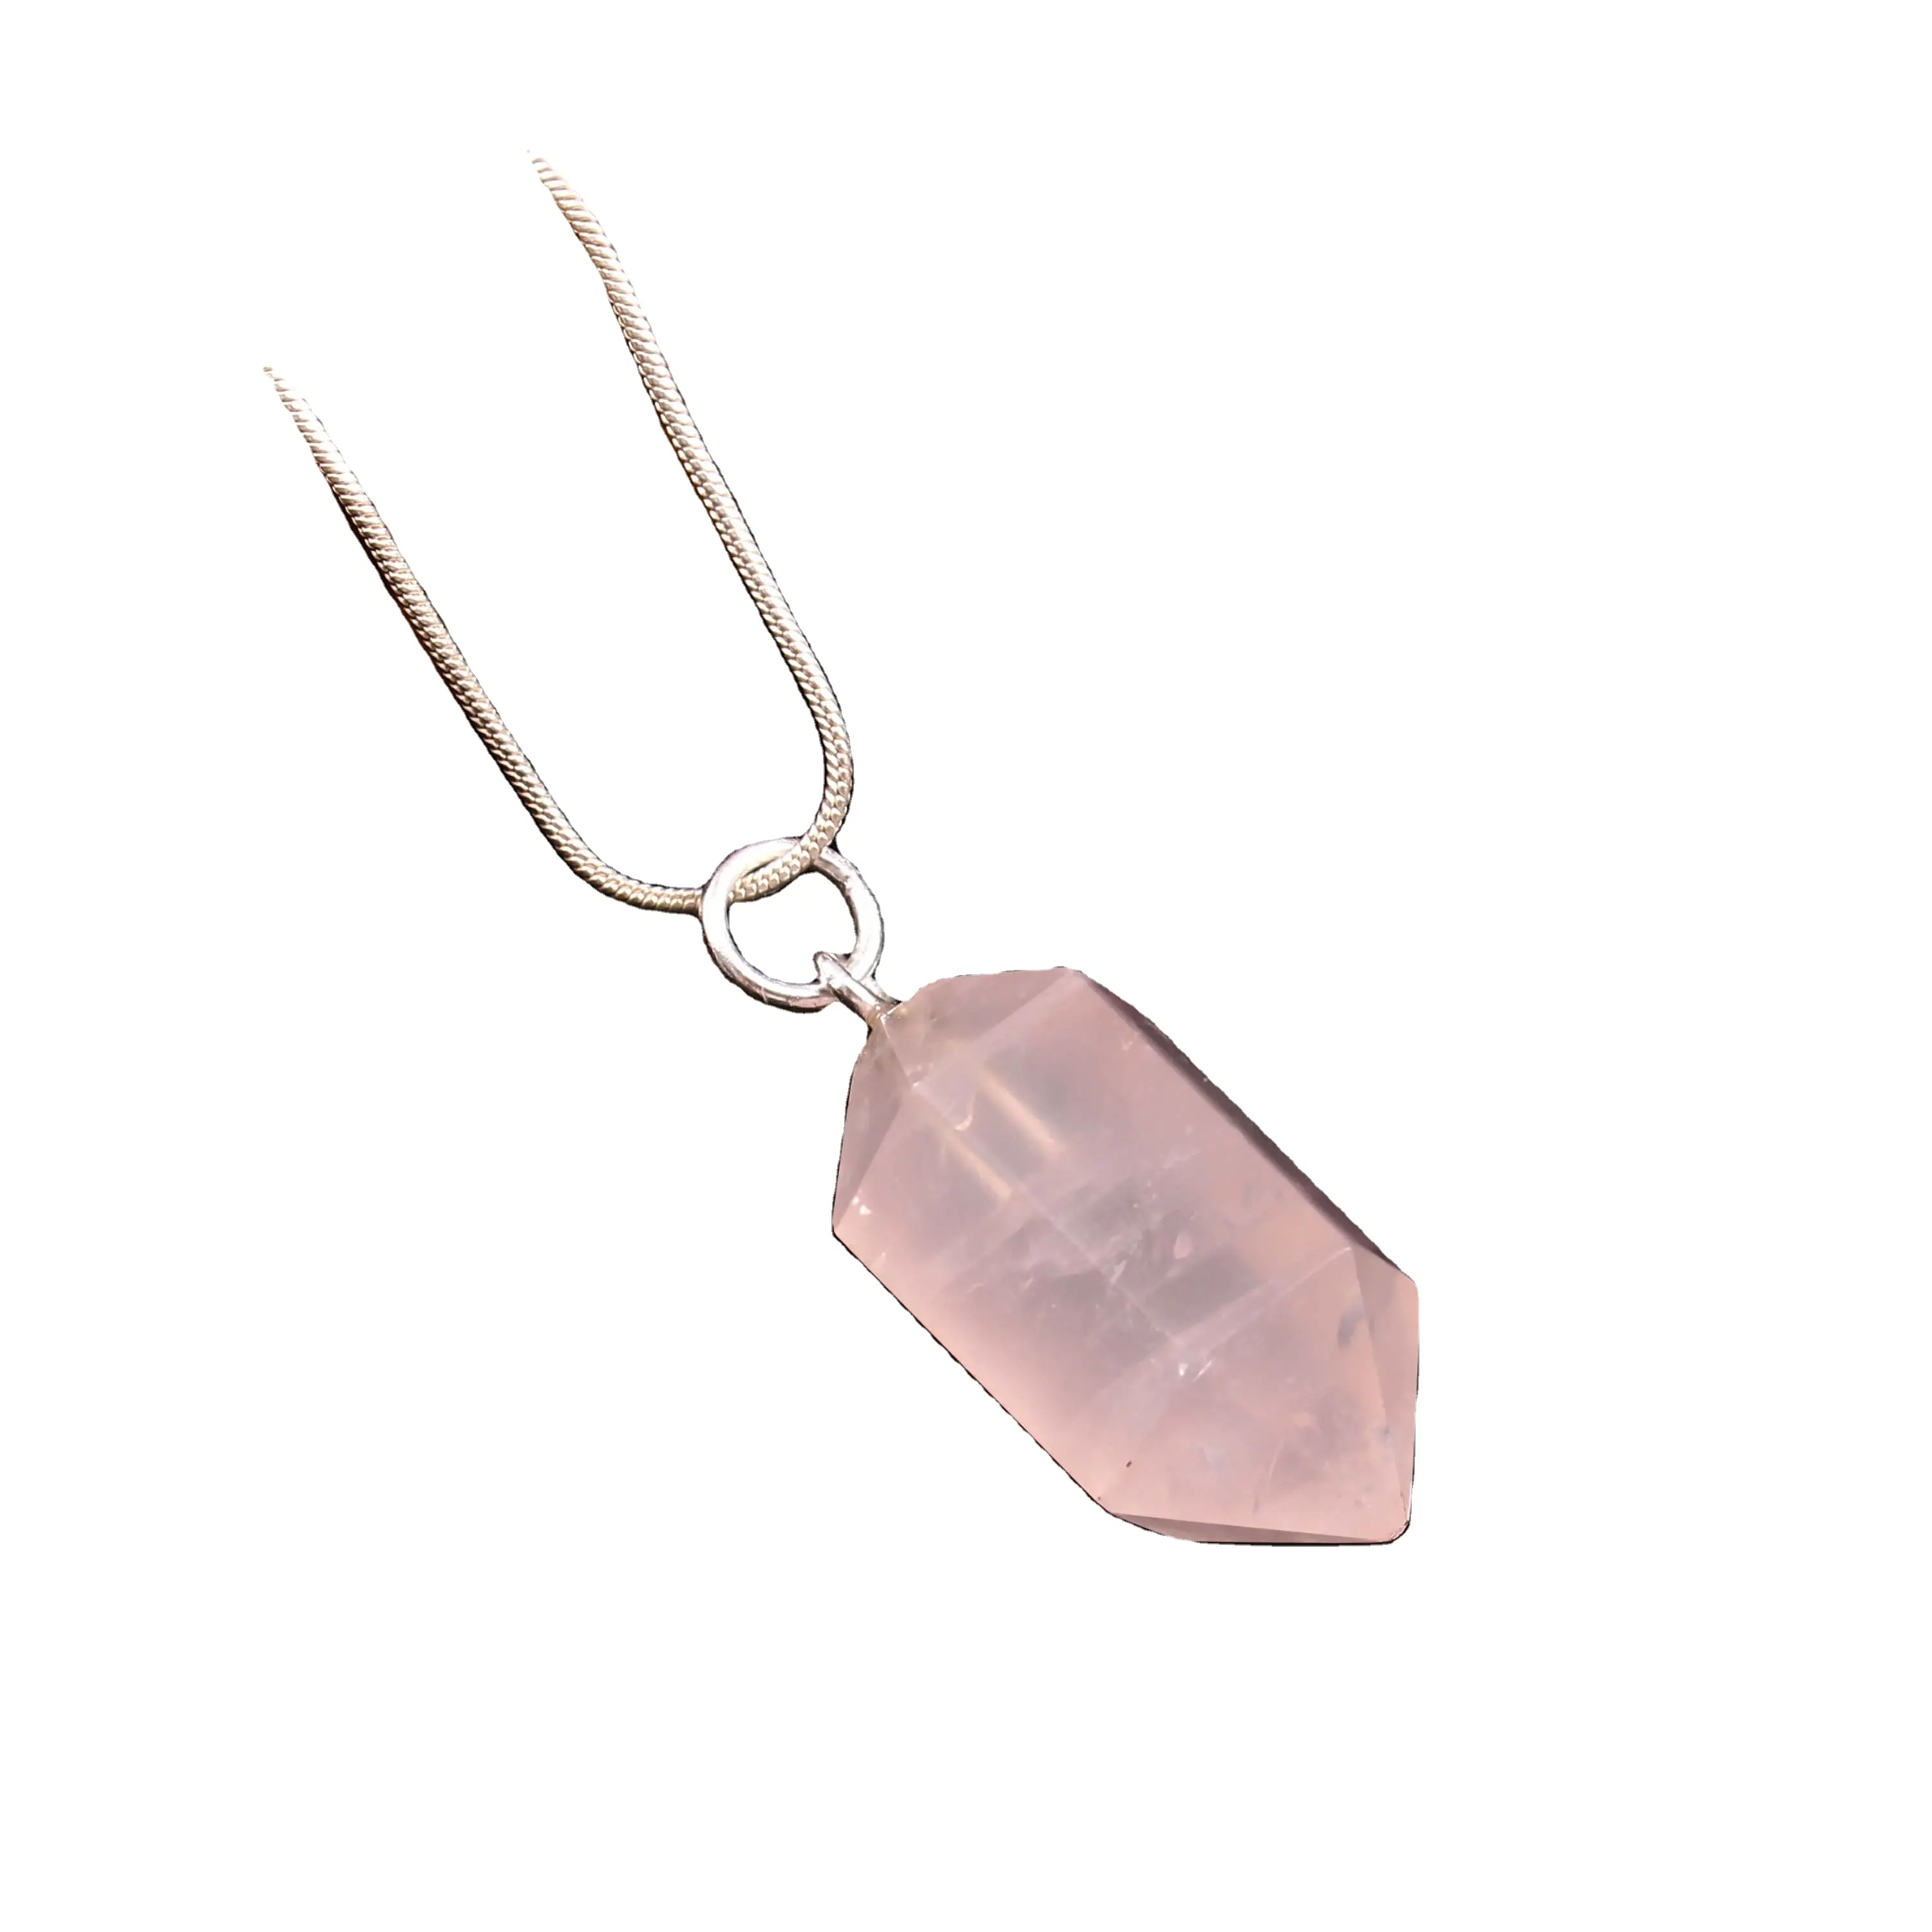 Wholesale Best Quality Natural Rose Quartz Both Side Pointed Pencil 925 Sterling Silver Pendant For Girls And Women